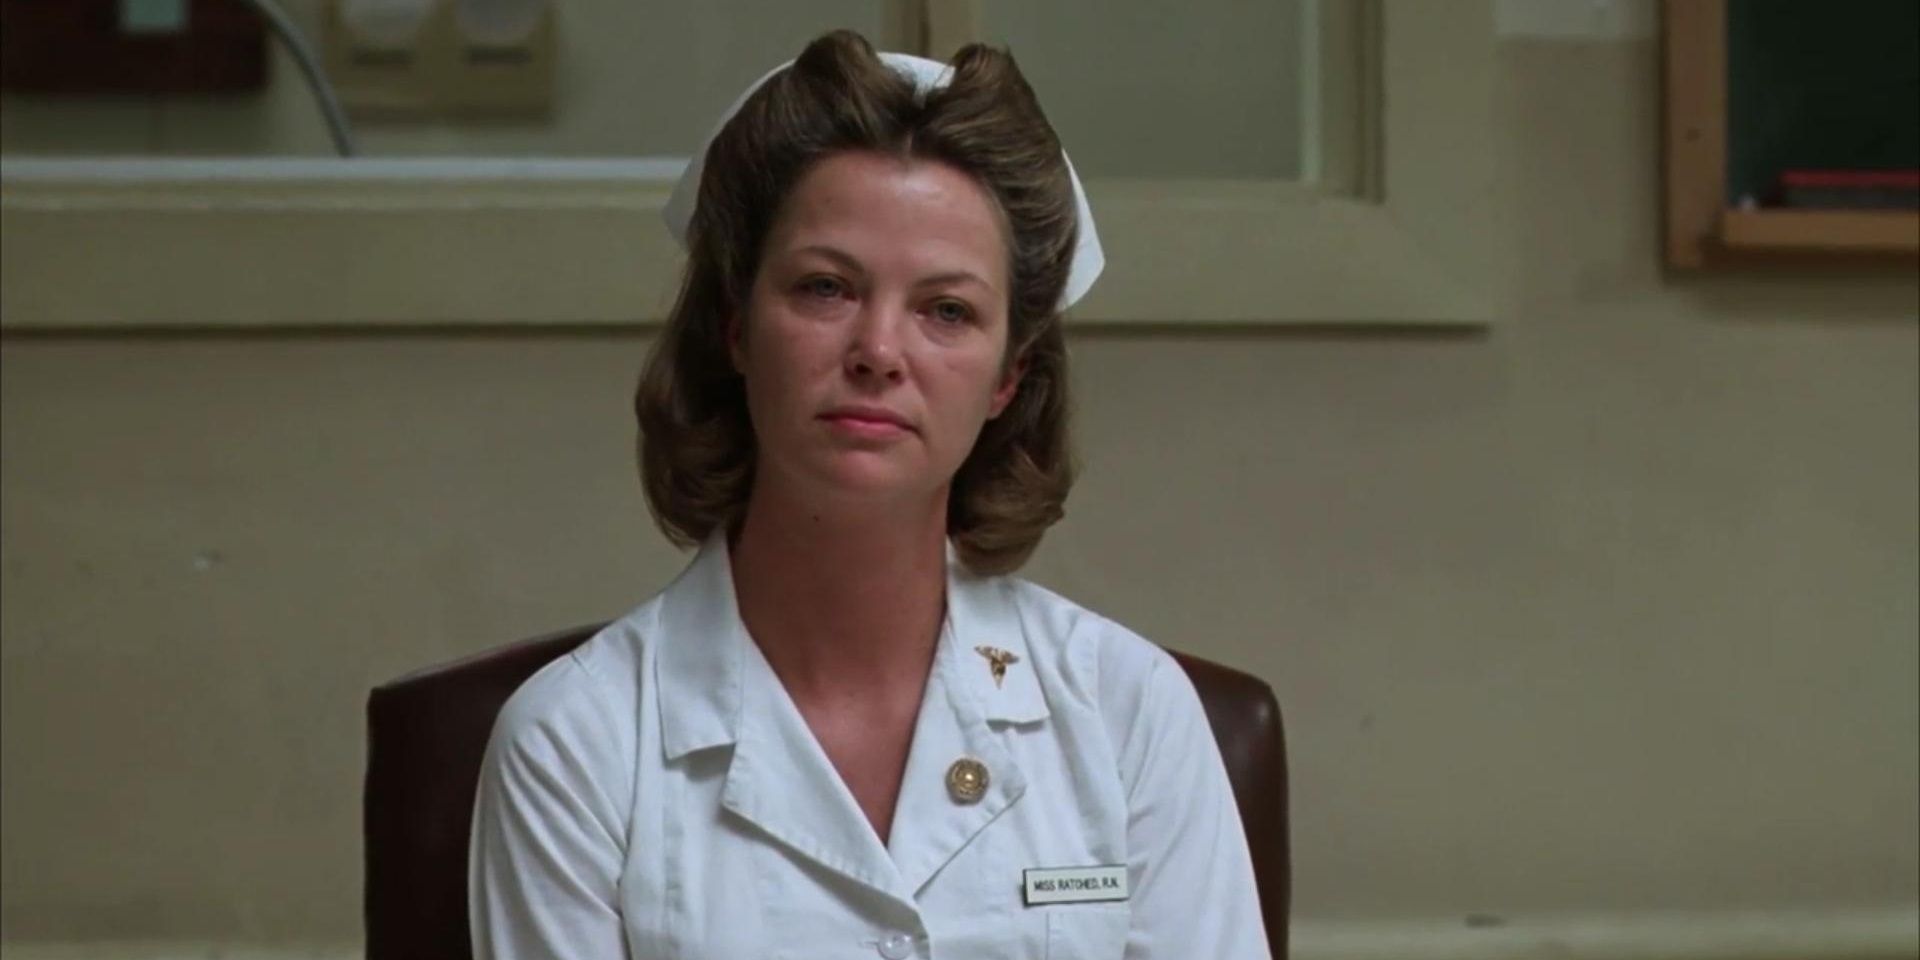 Nurse Ratched in One Flew Over the Cuckoo's Nest